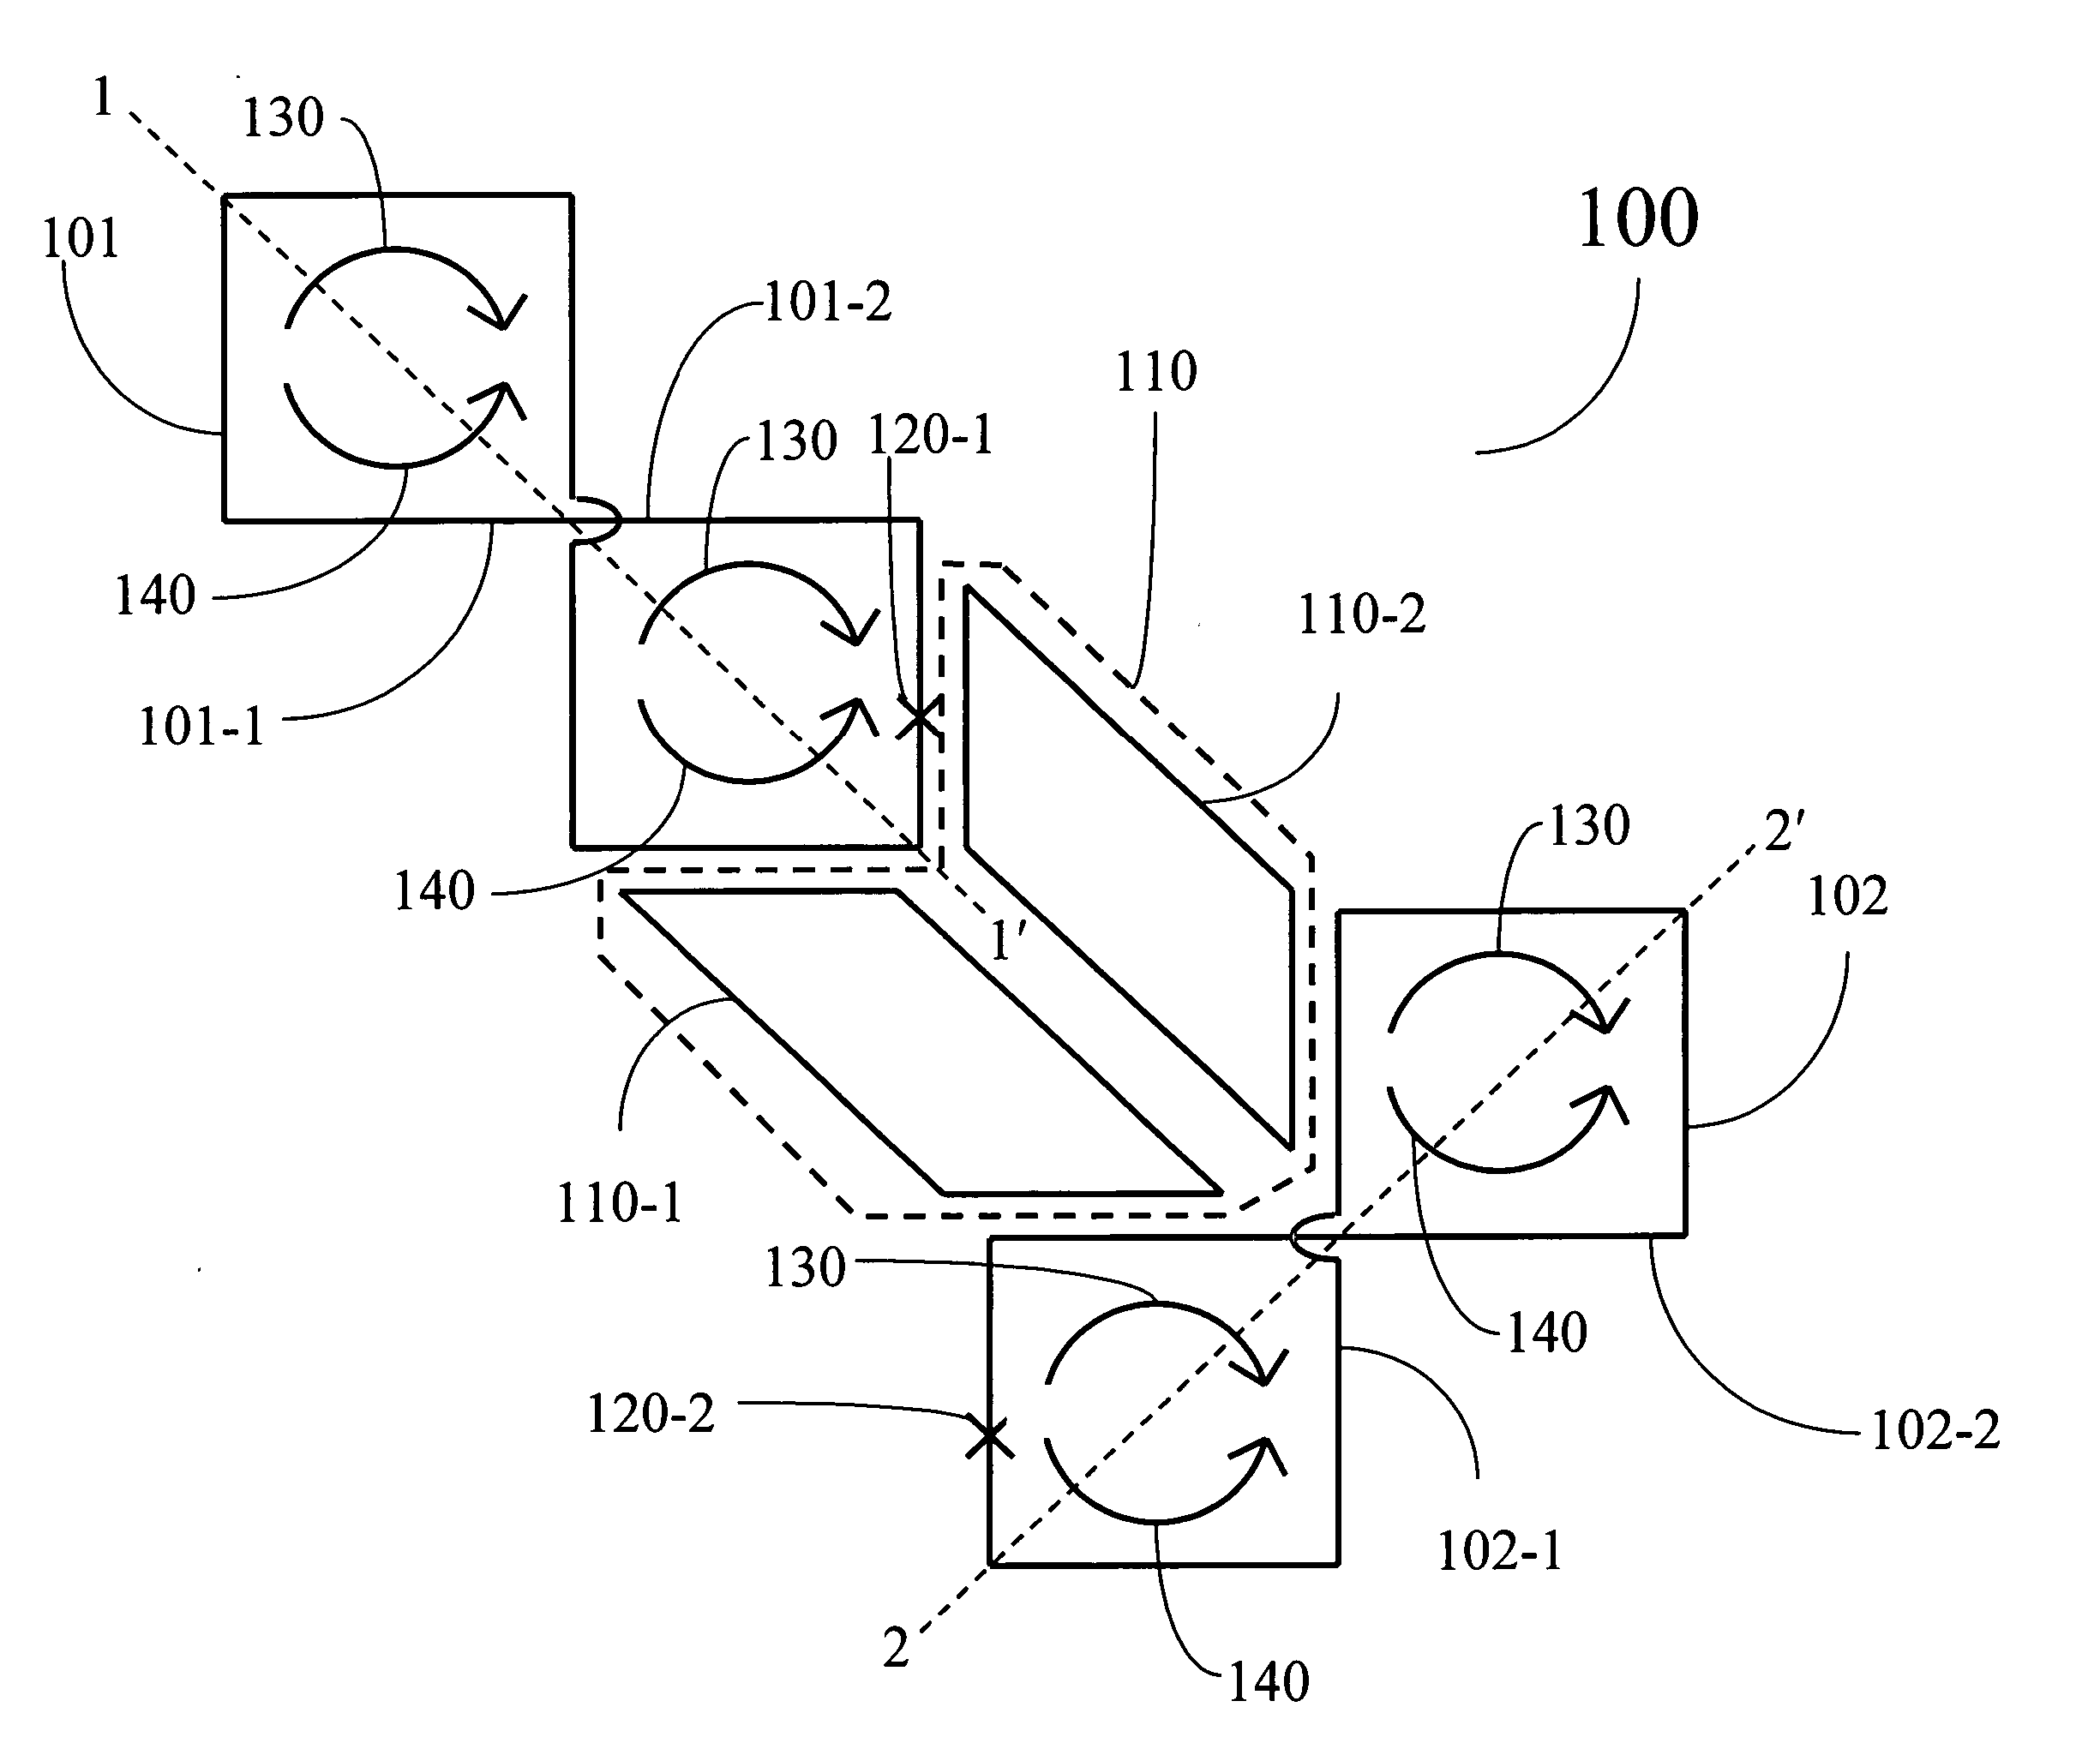 Coupling methods and architectures for information processing